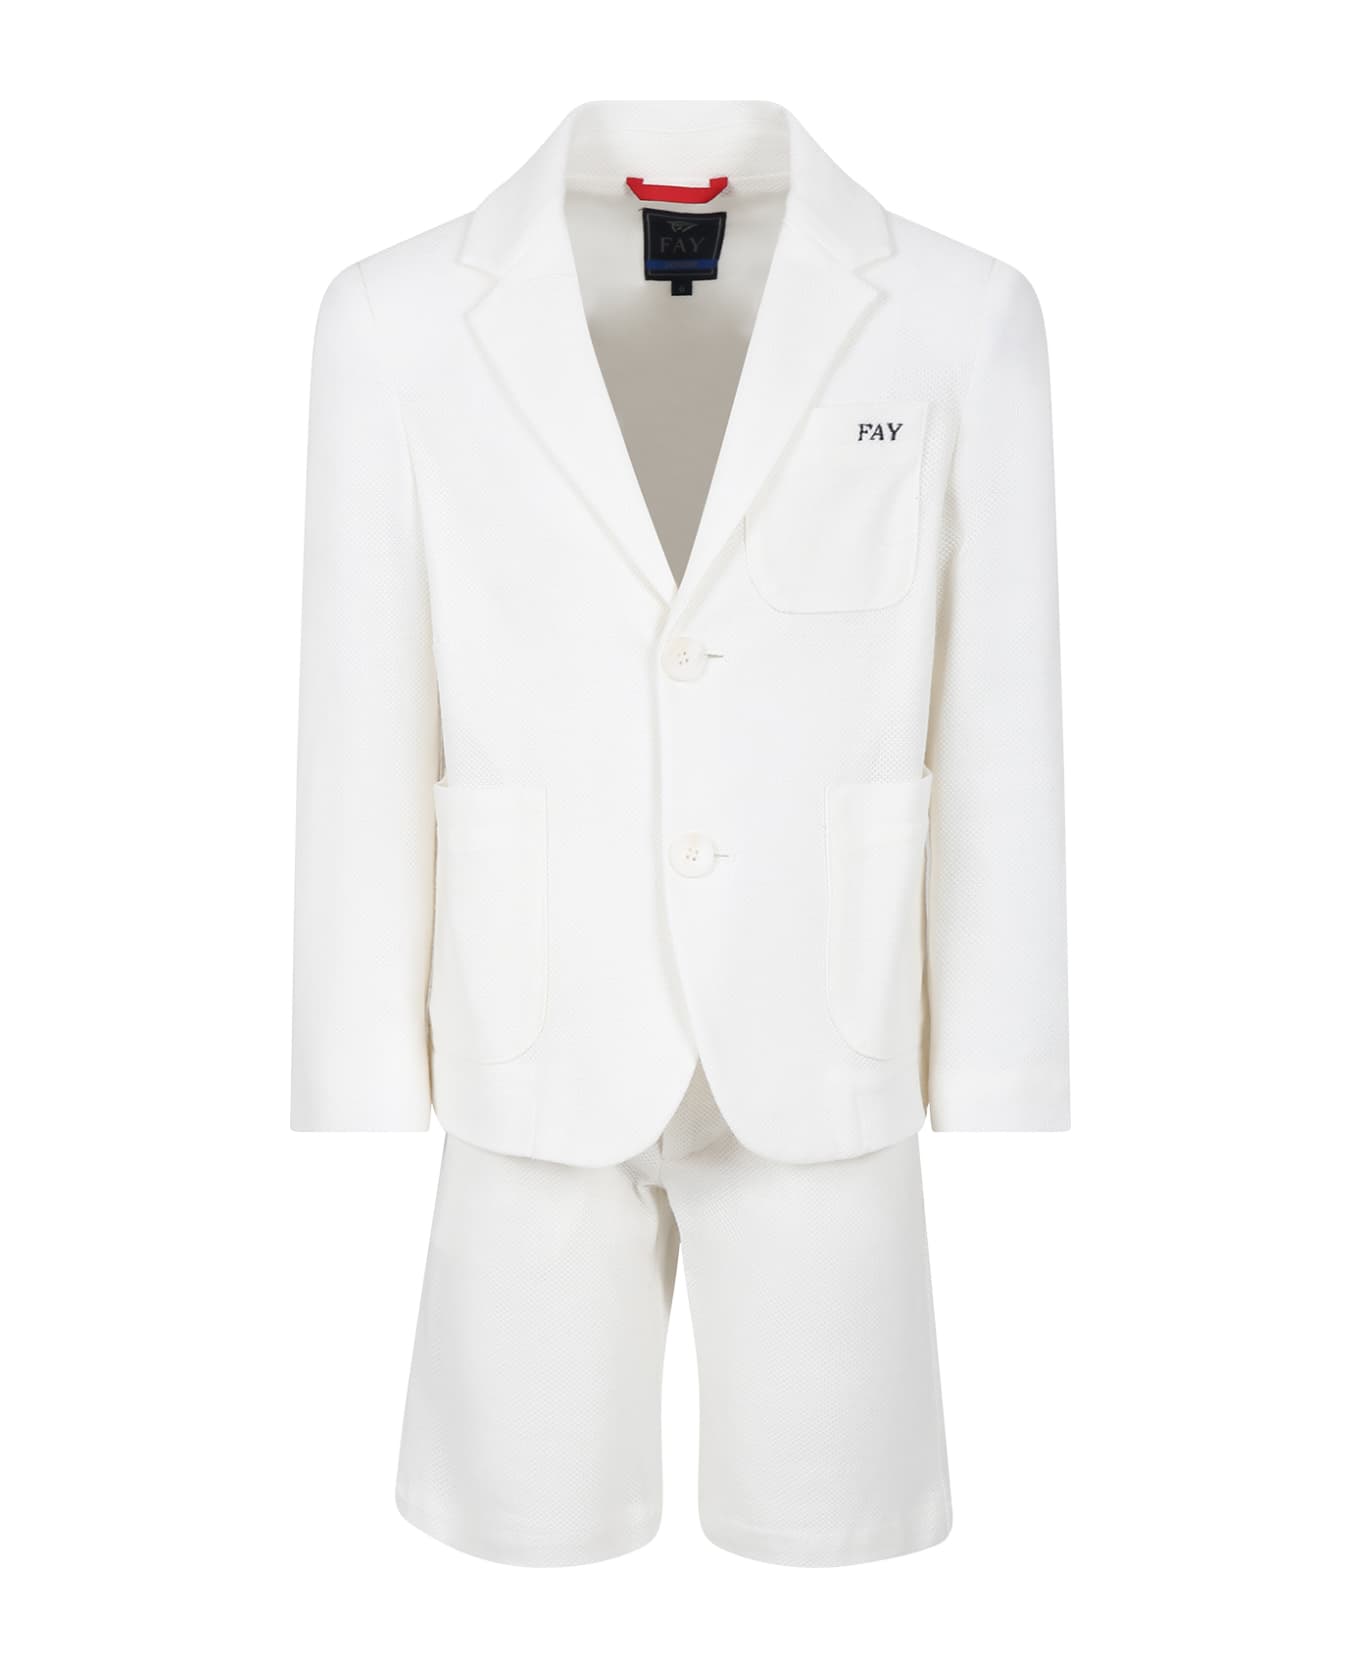 Fay Ivory Suit For Boy With Logo - Ivory スーツ